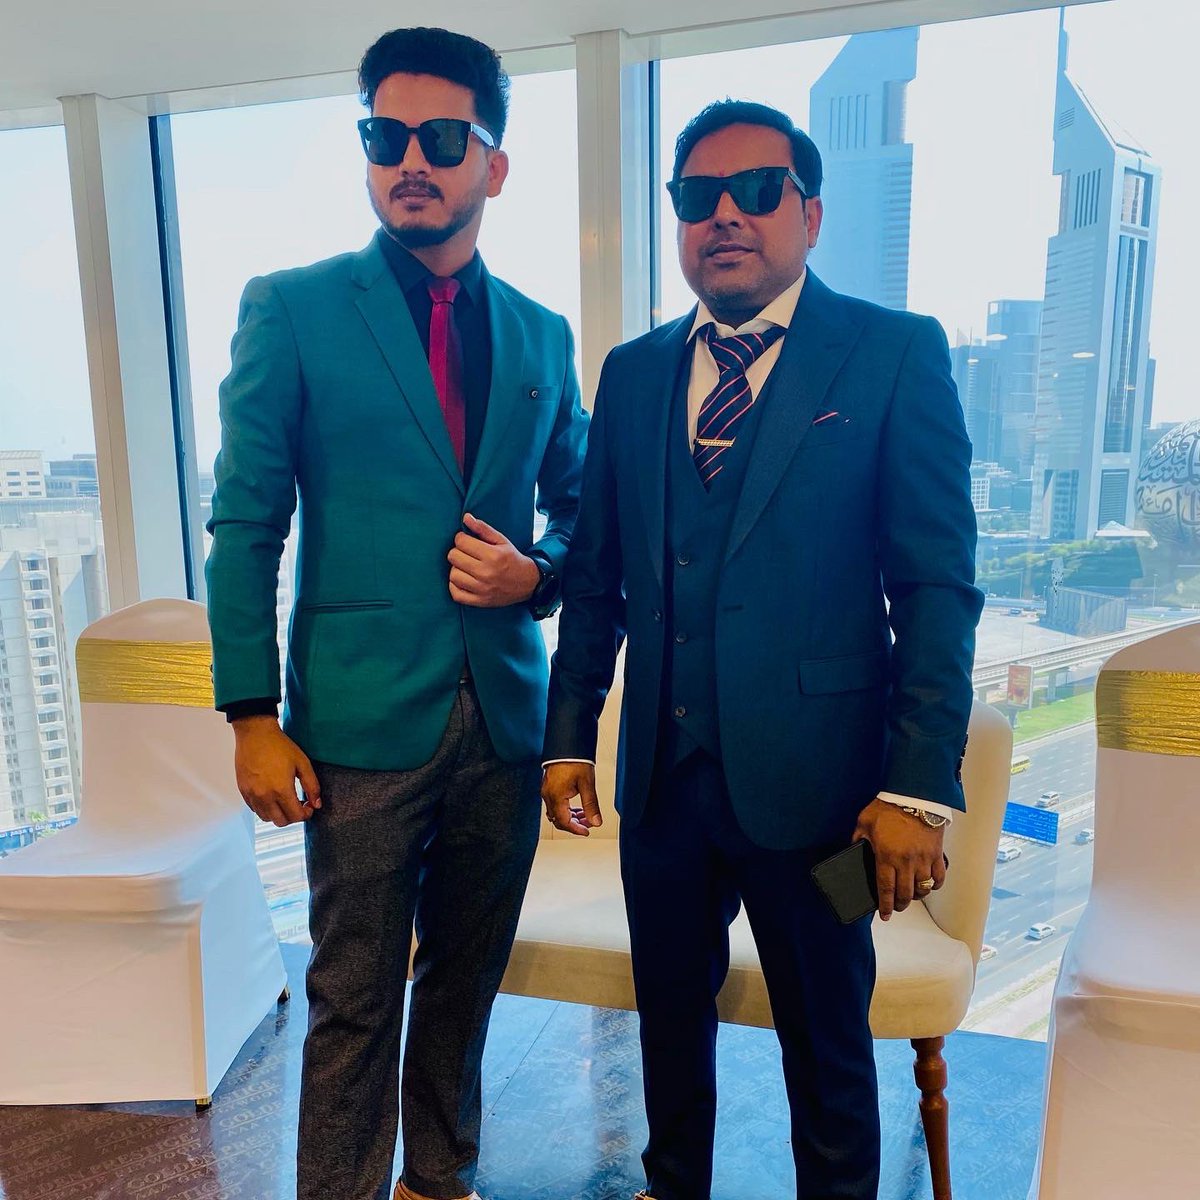 Happy clients are our motivation. Launching preparations of “Goldessa”, Dubai. We are very happy to have Mr Neelesh Singh (Business tycoon & Owner of African Biz and VS Group ltd.), Mr Debashish ji and Mr Aswini ji (Owner of Globenex international Sarl).